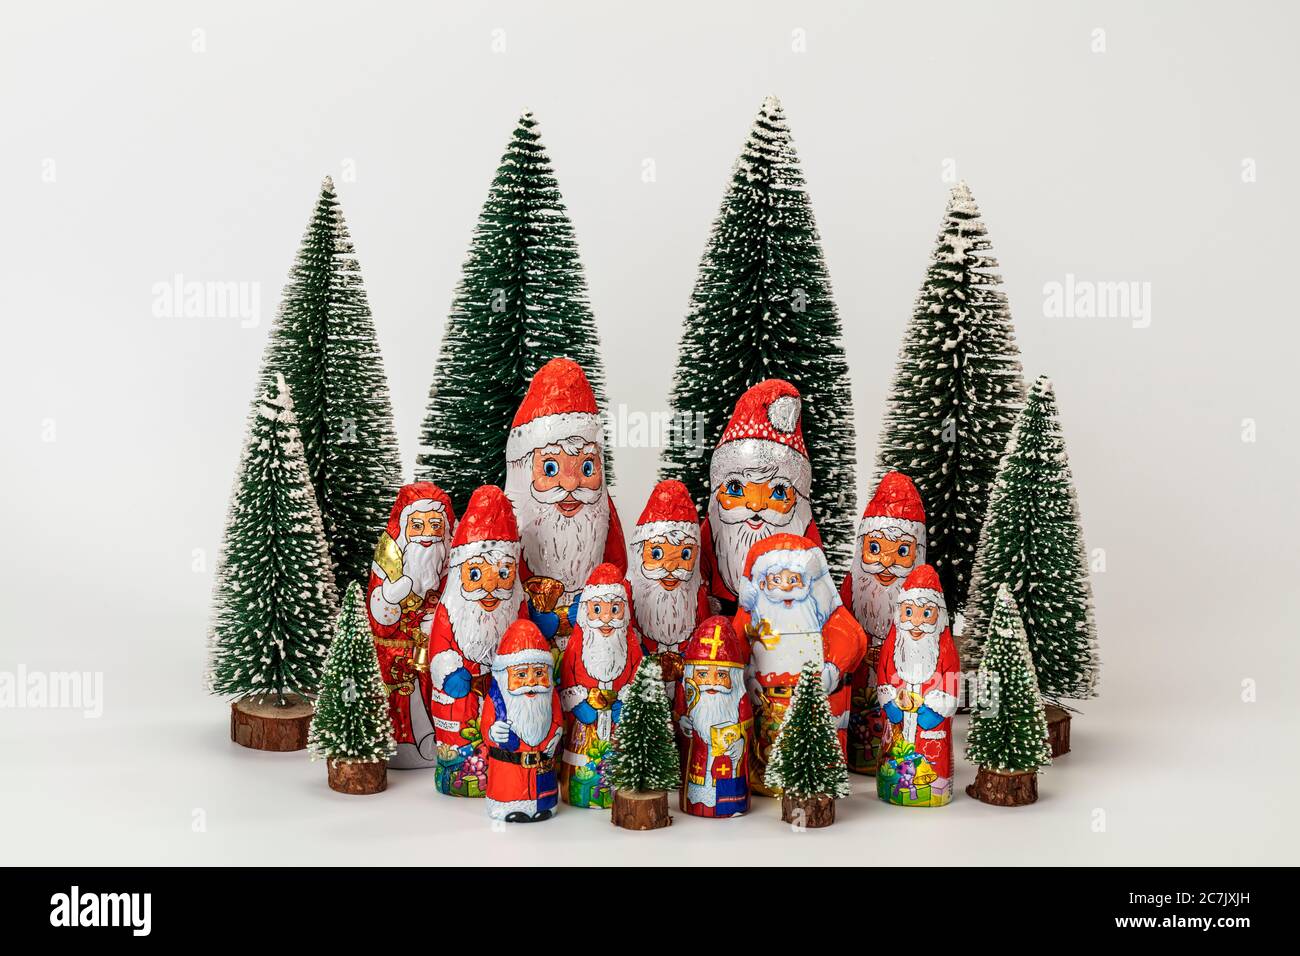 Various chocolate nicholas stand in the midst of miniature Christmas trees, white background, icon image, Christmas time, Stock Photo